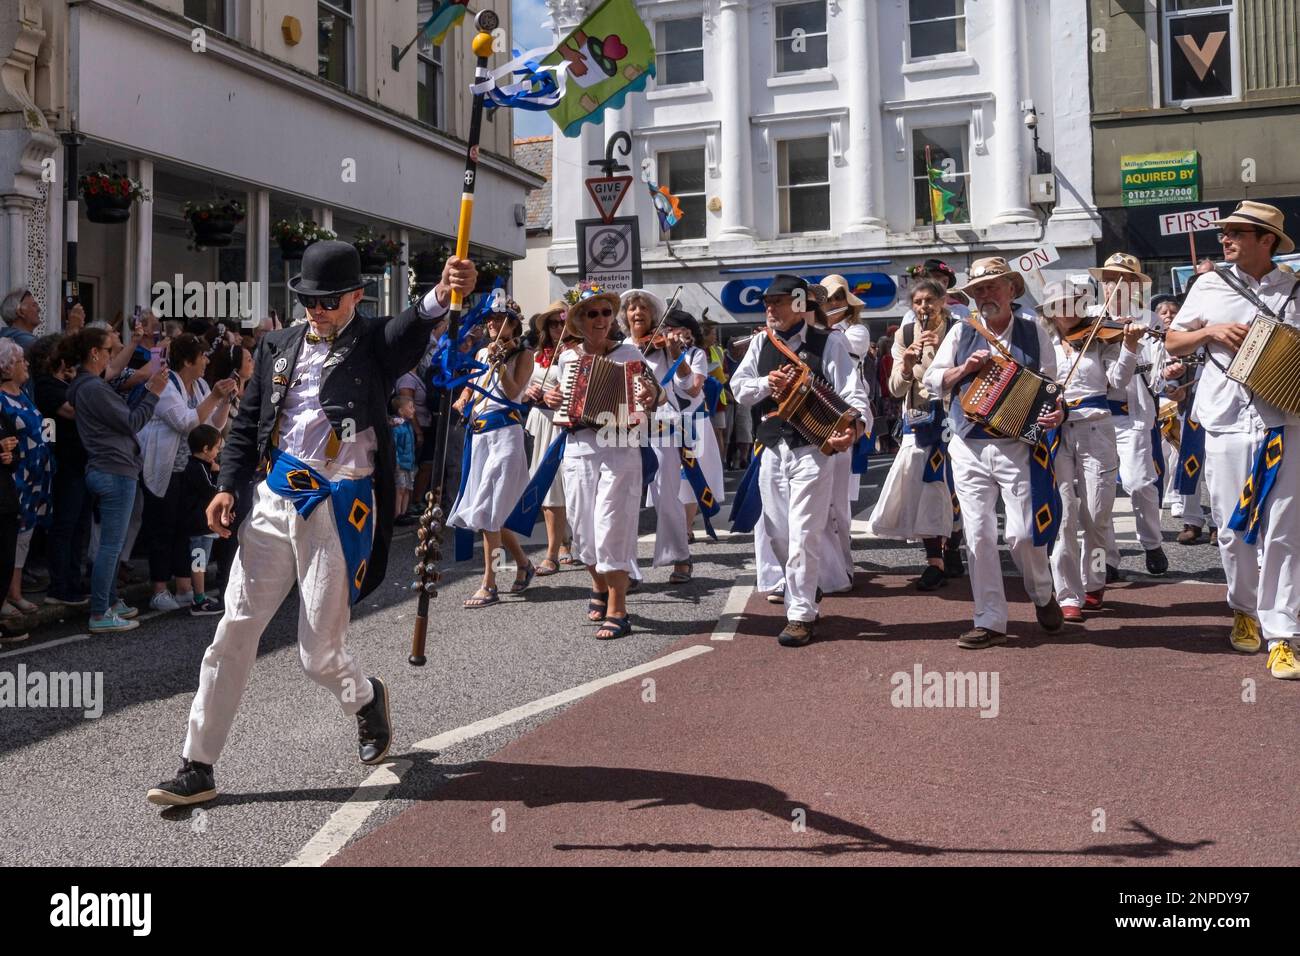 Tom White leading the Golowan band through Penzance on the colourful Mazey Day processions in Cornwall in England in the UK. Stock Photo